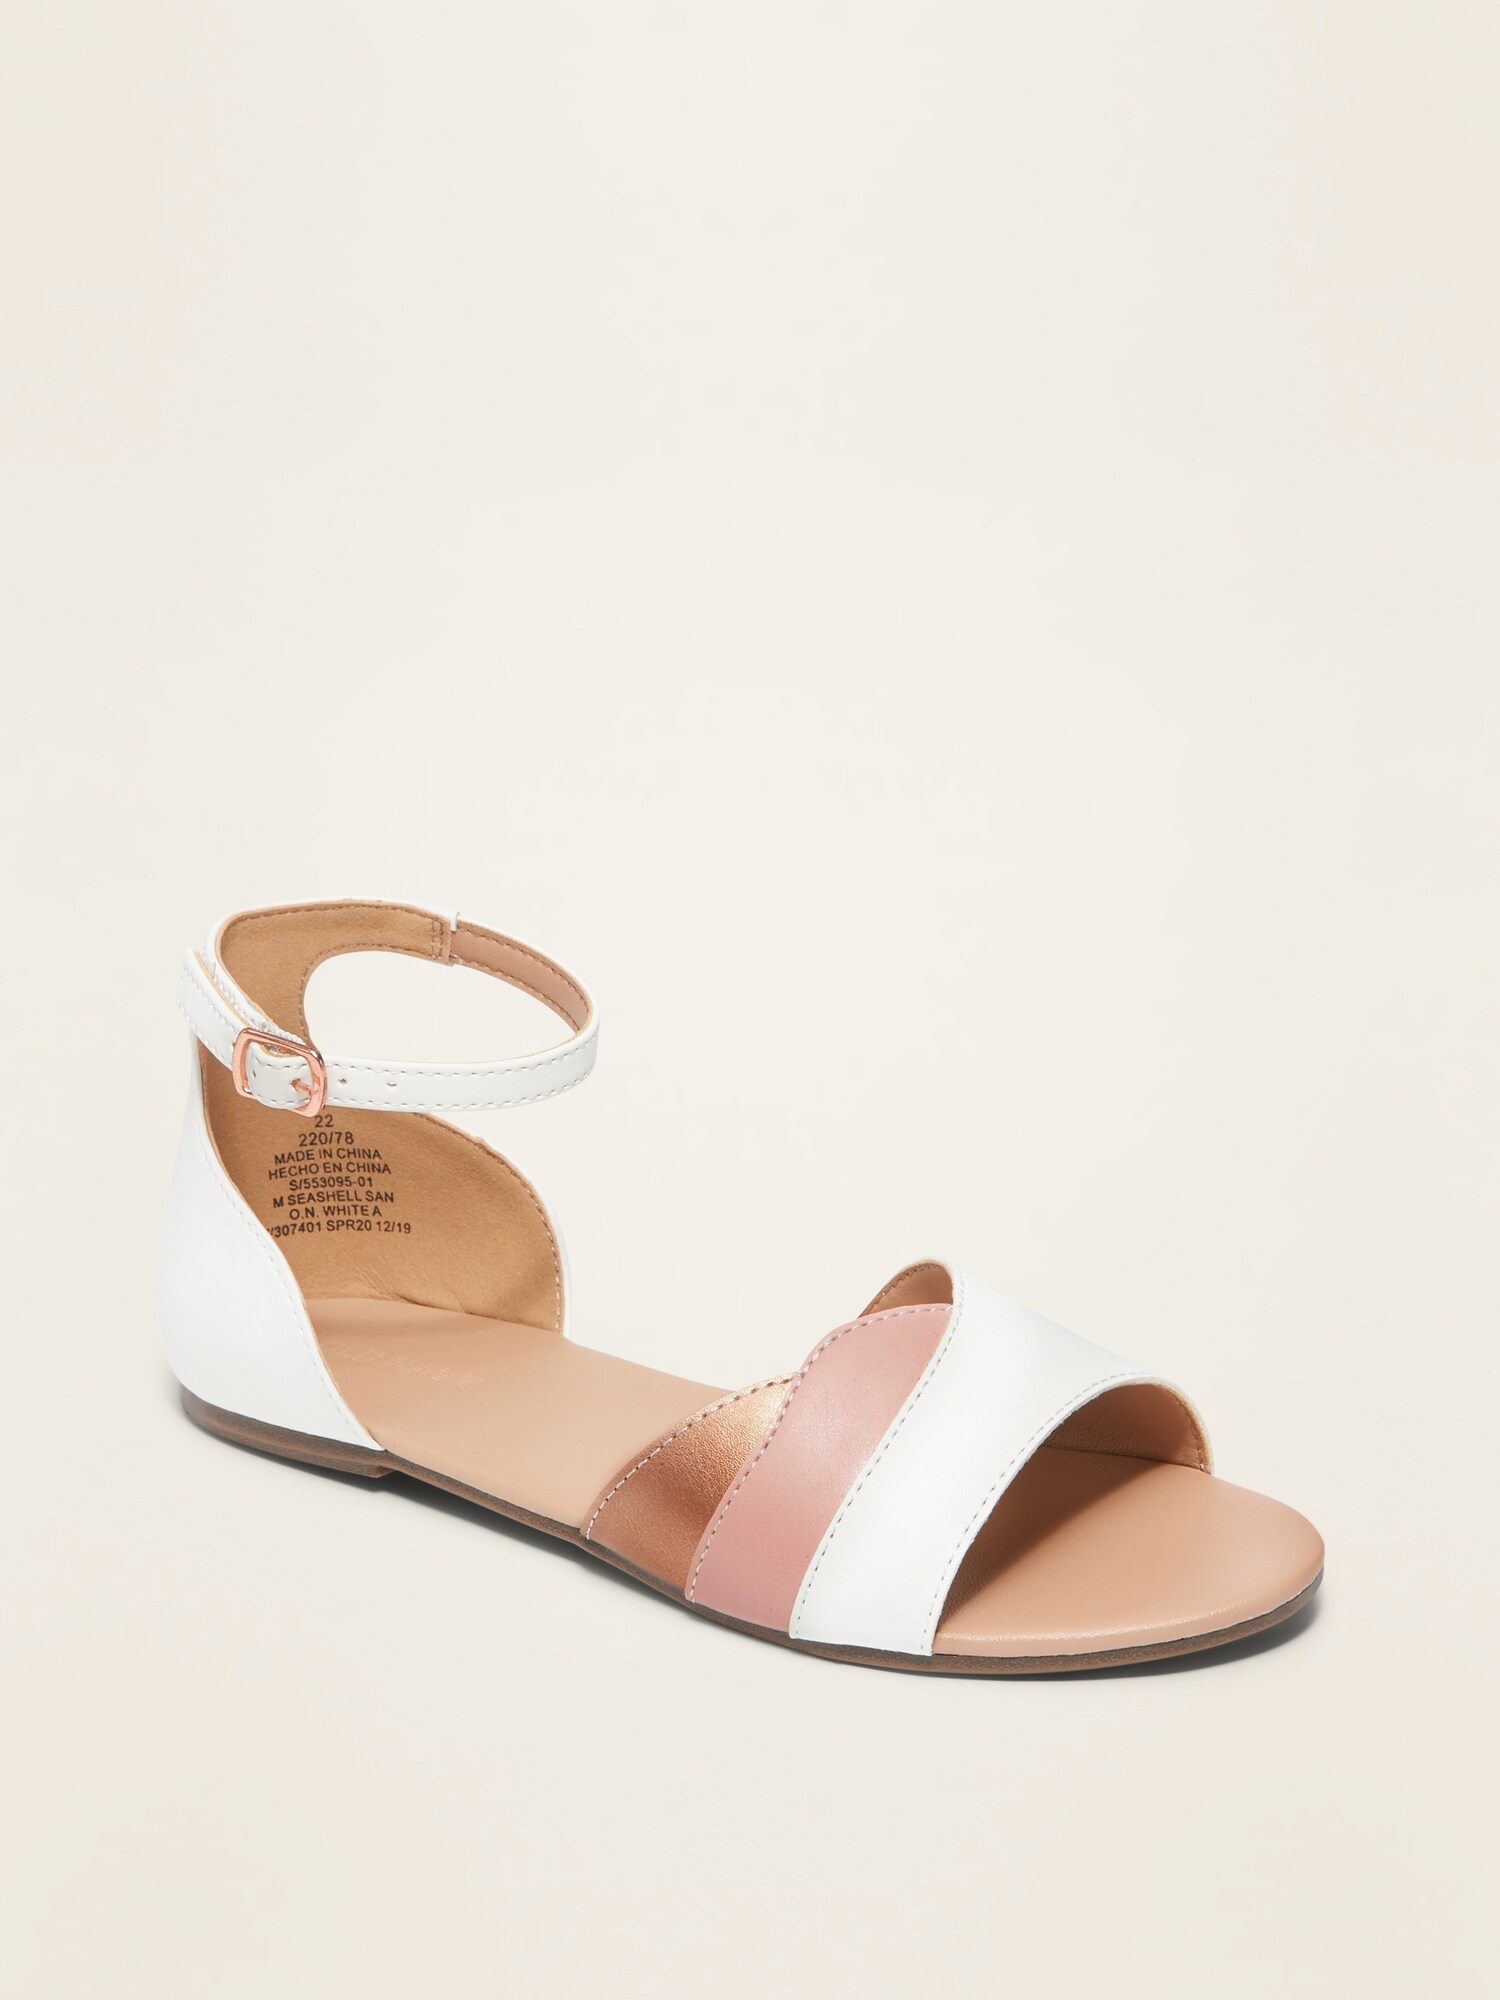 m and s girls sandals